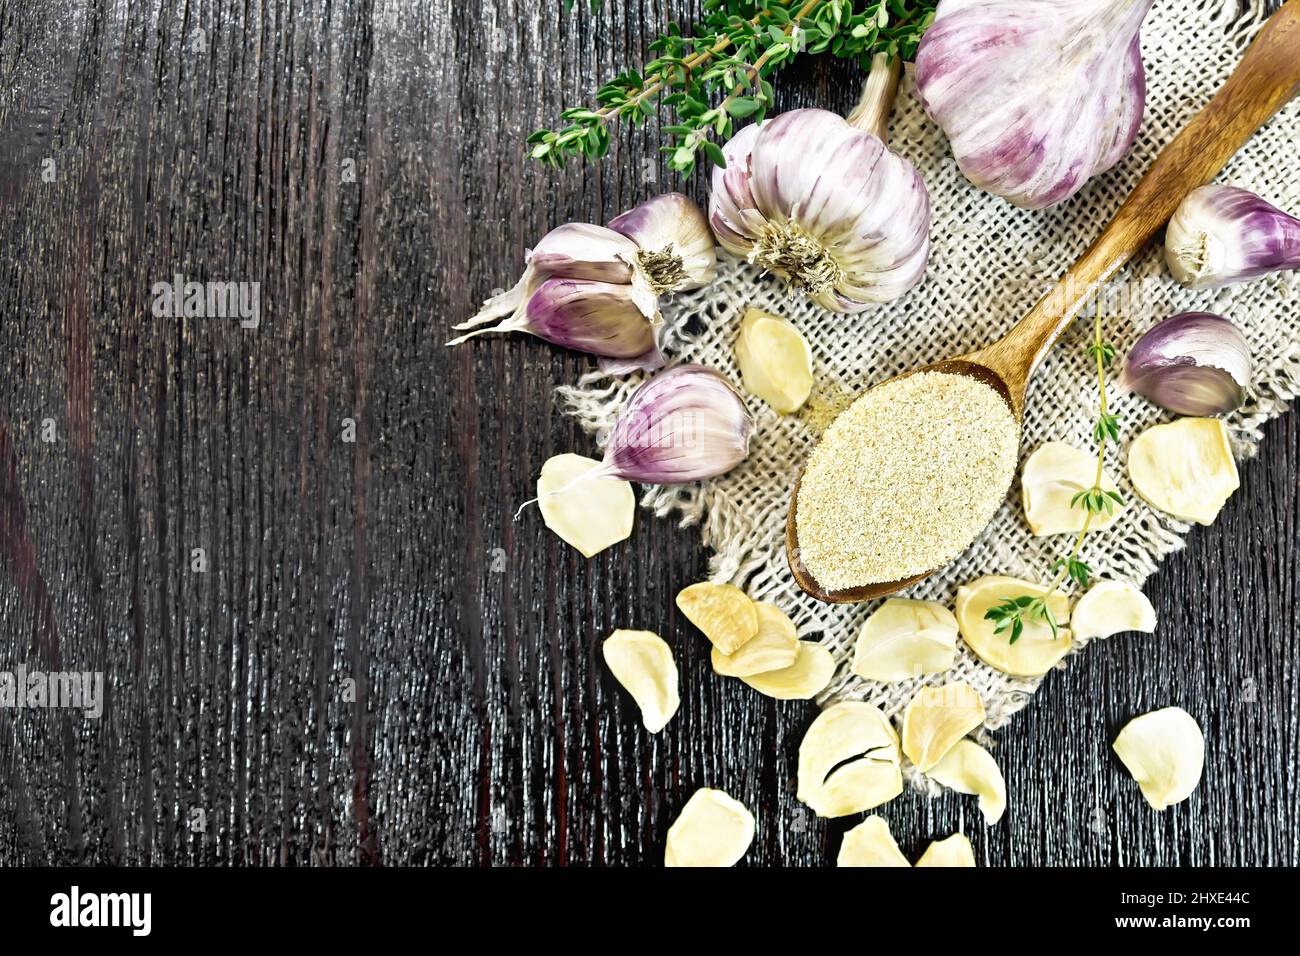 Ground garlic in a spoon on a burlap, dried and fresh garlic, bunch of thyme on background of wooden board from above Stock Photo